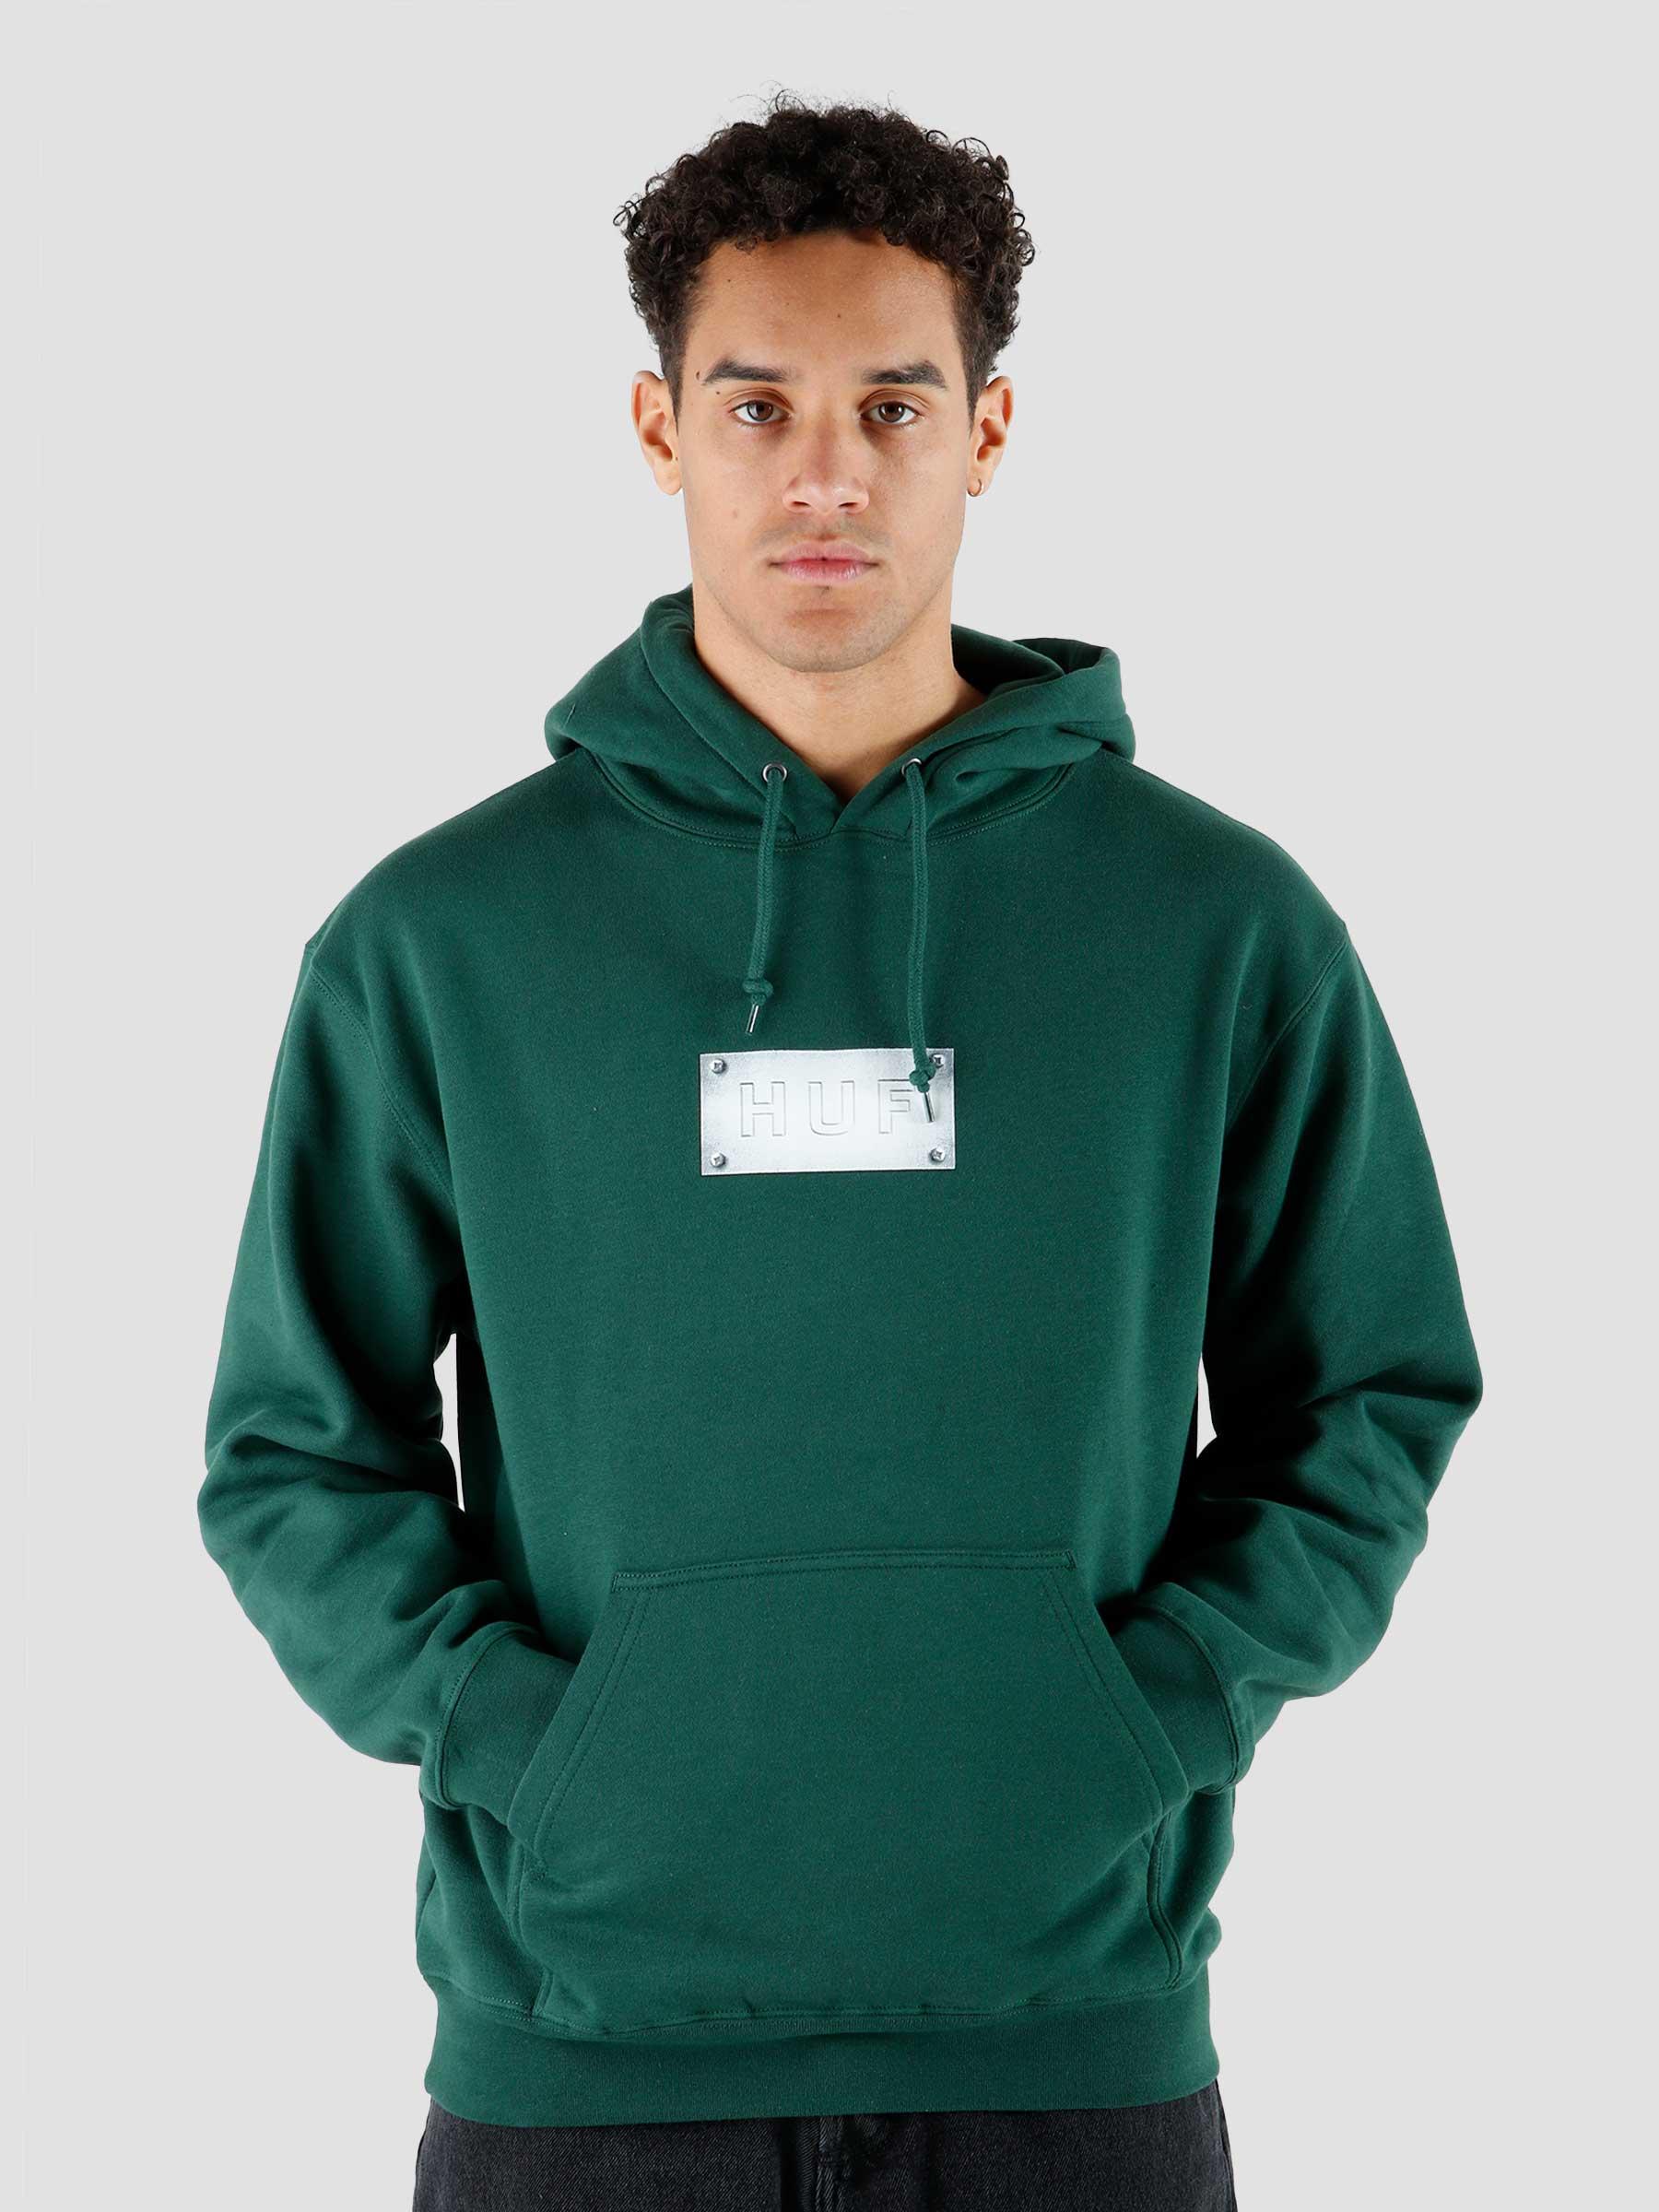 Hardware Hoodie Forest Green PF00523